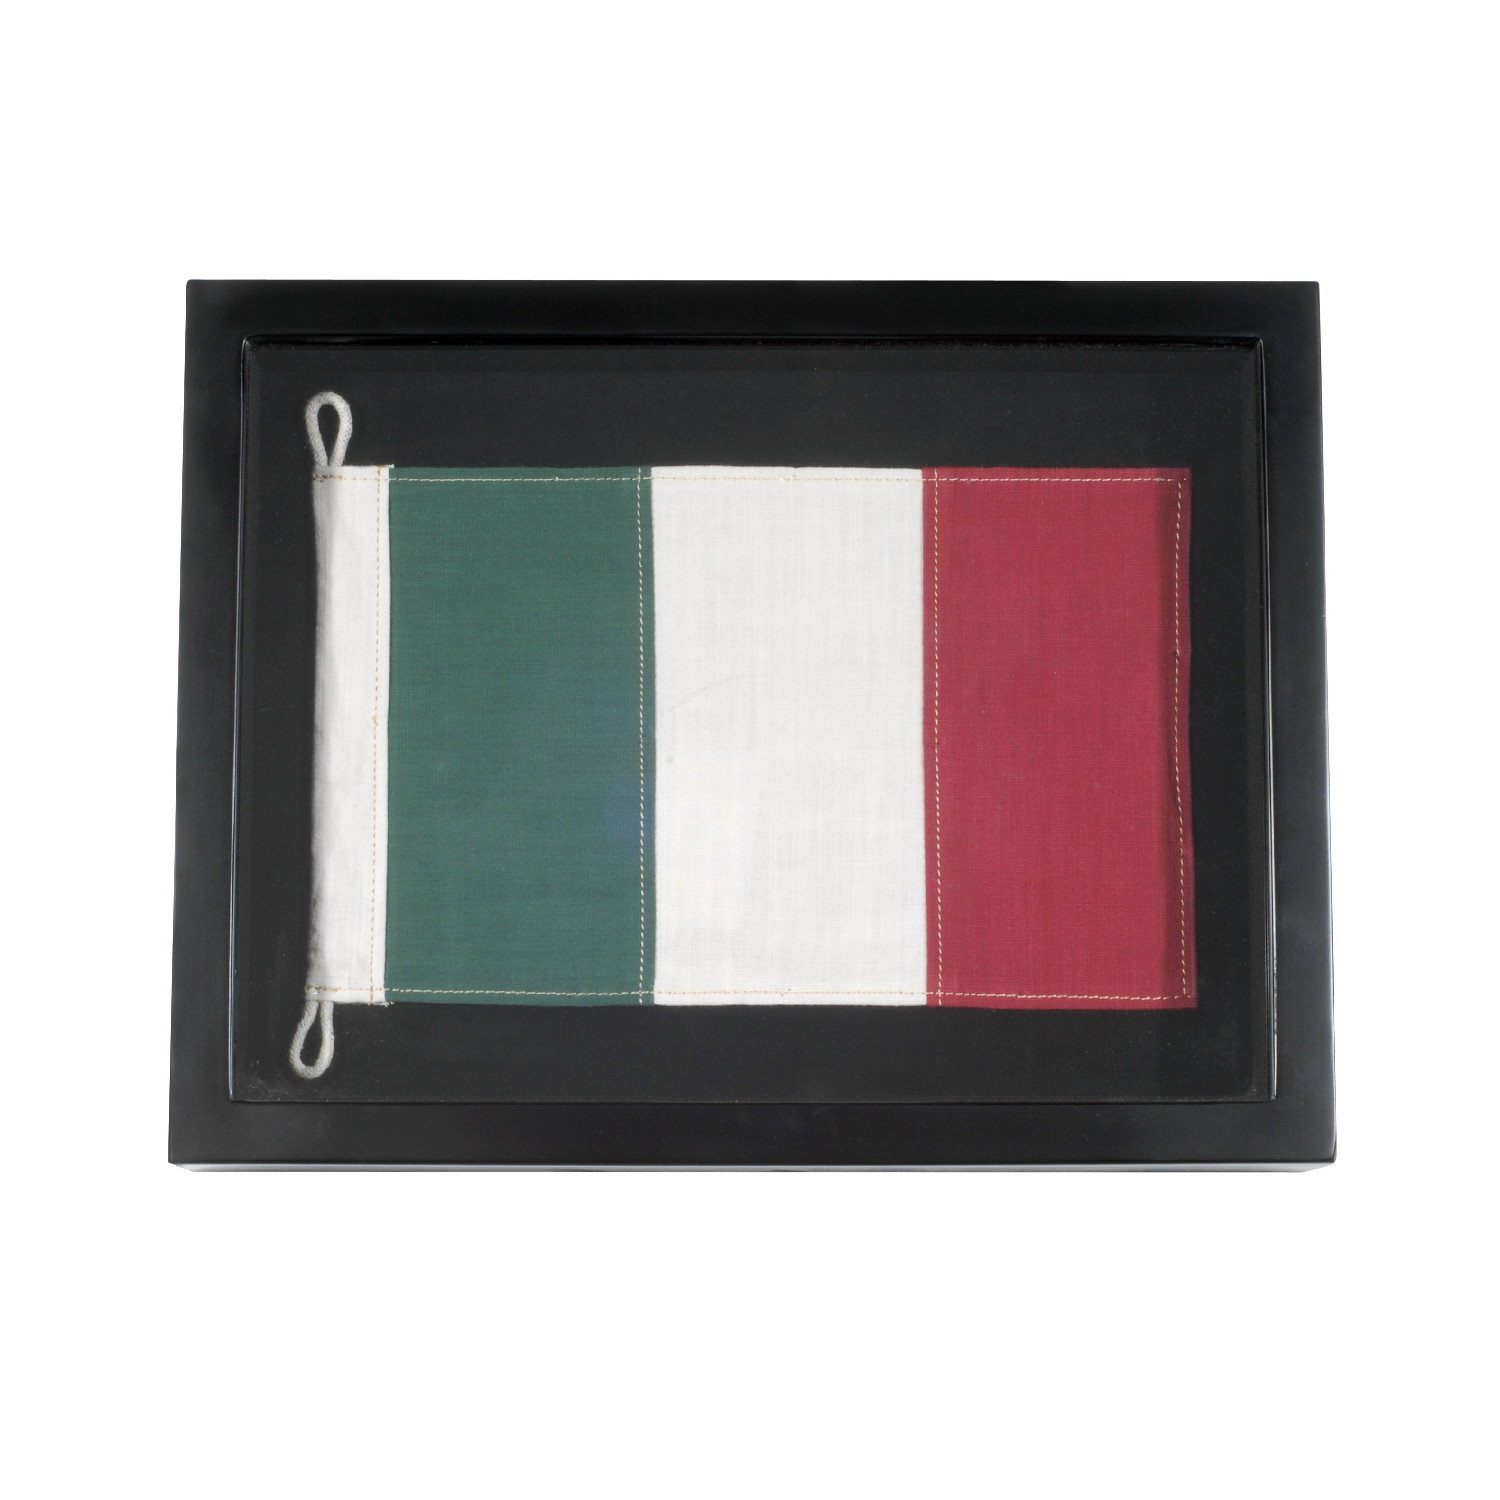 Photo of Timothy oulton flag shadow box mini 45x35cm print in square in green